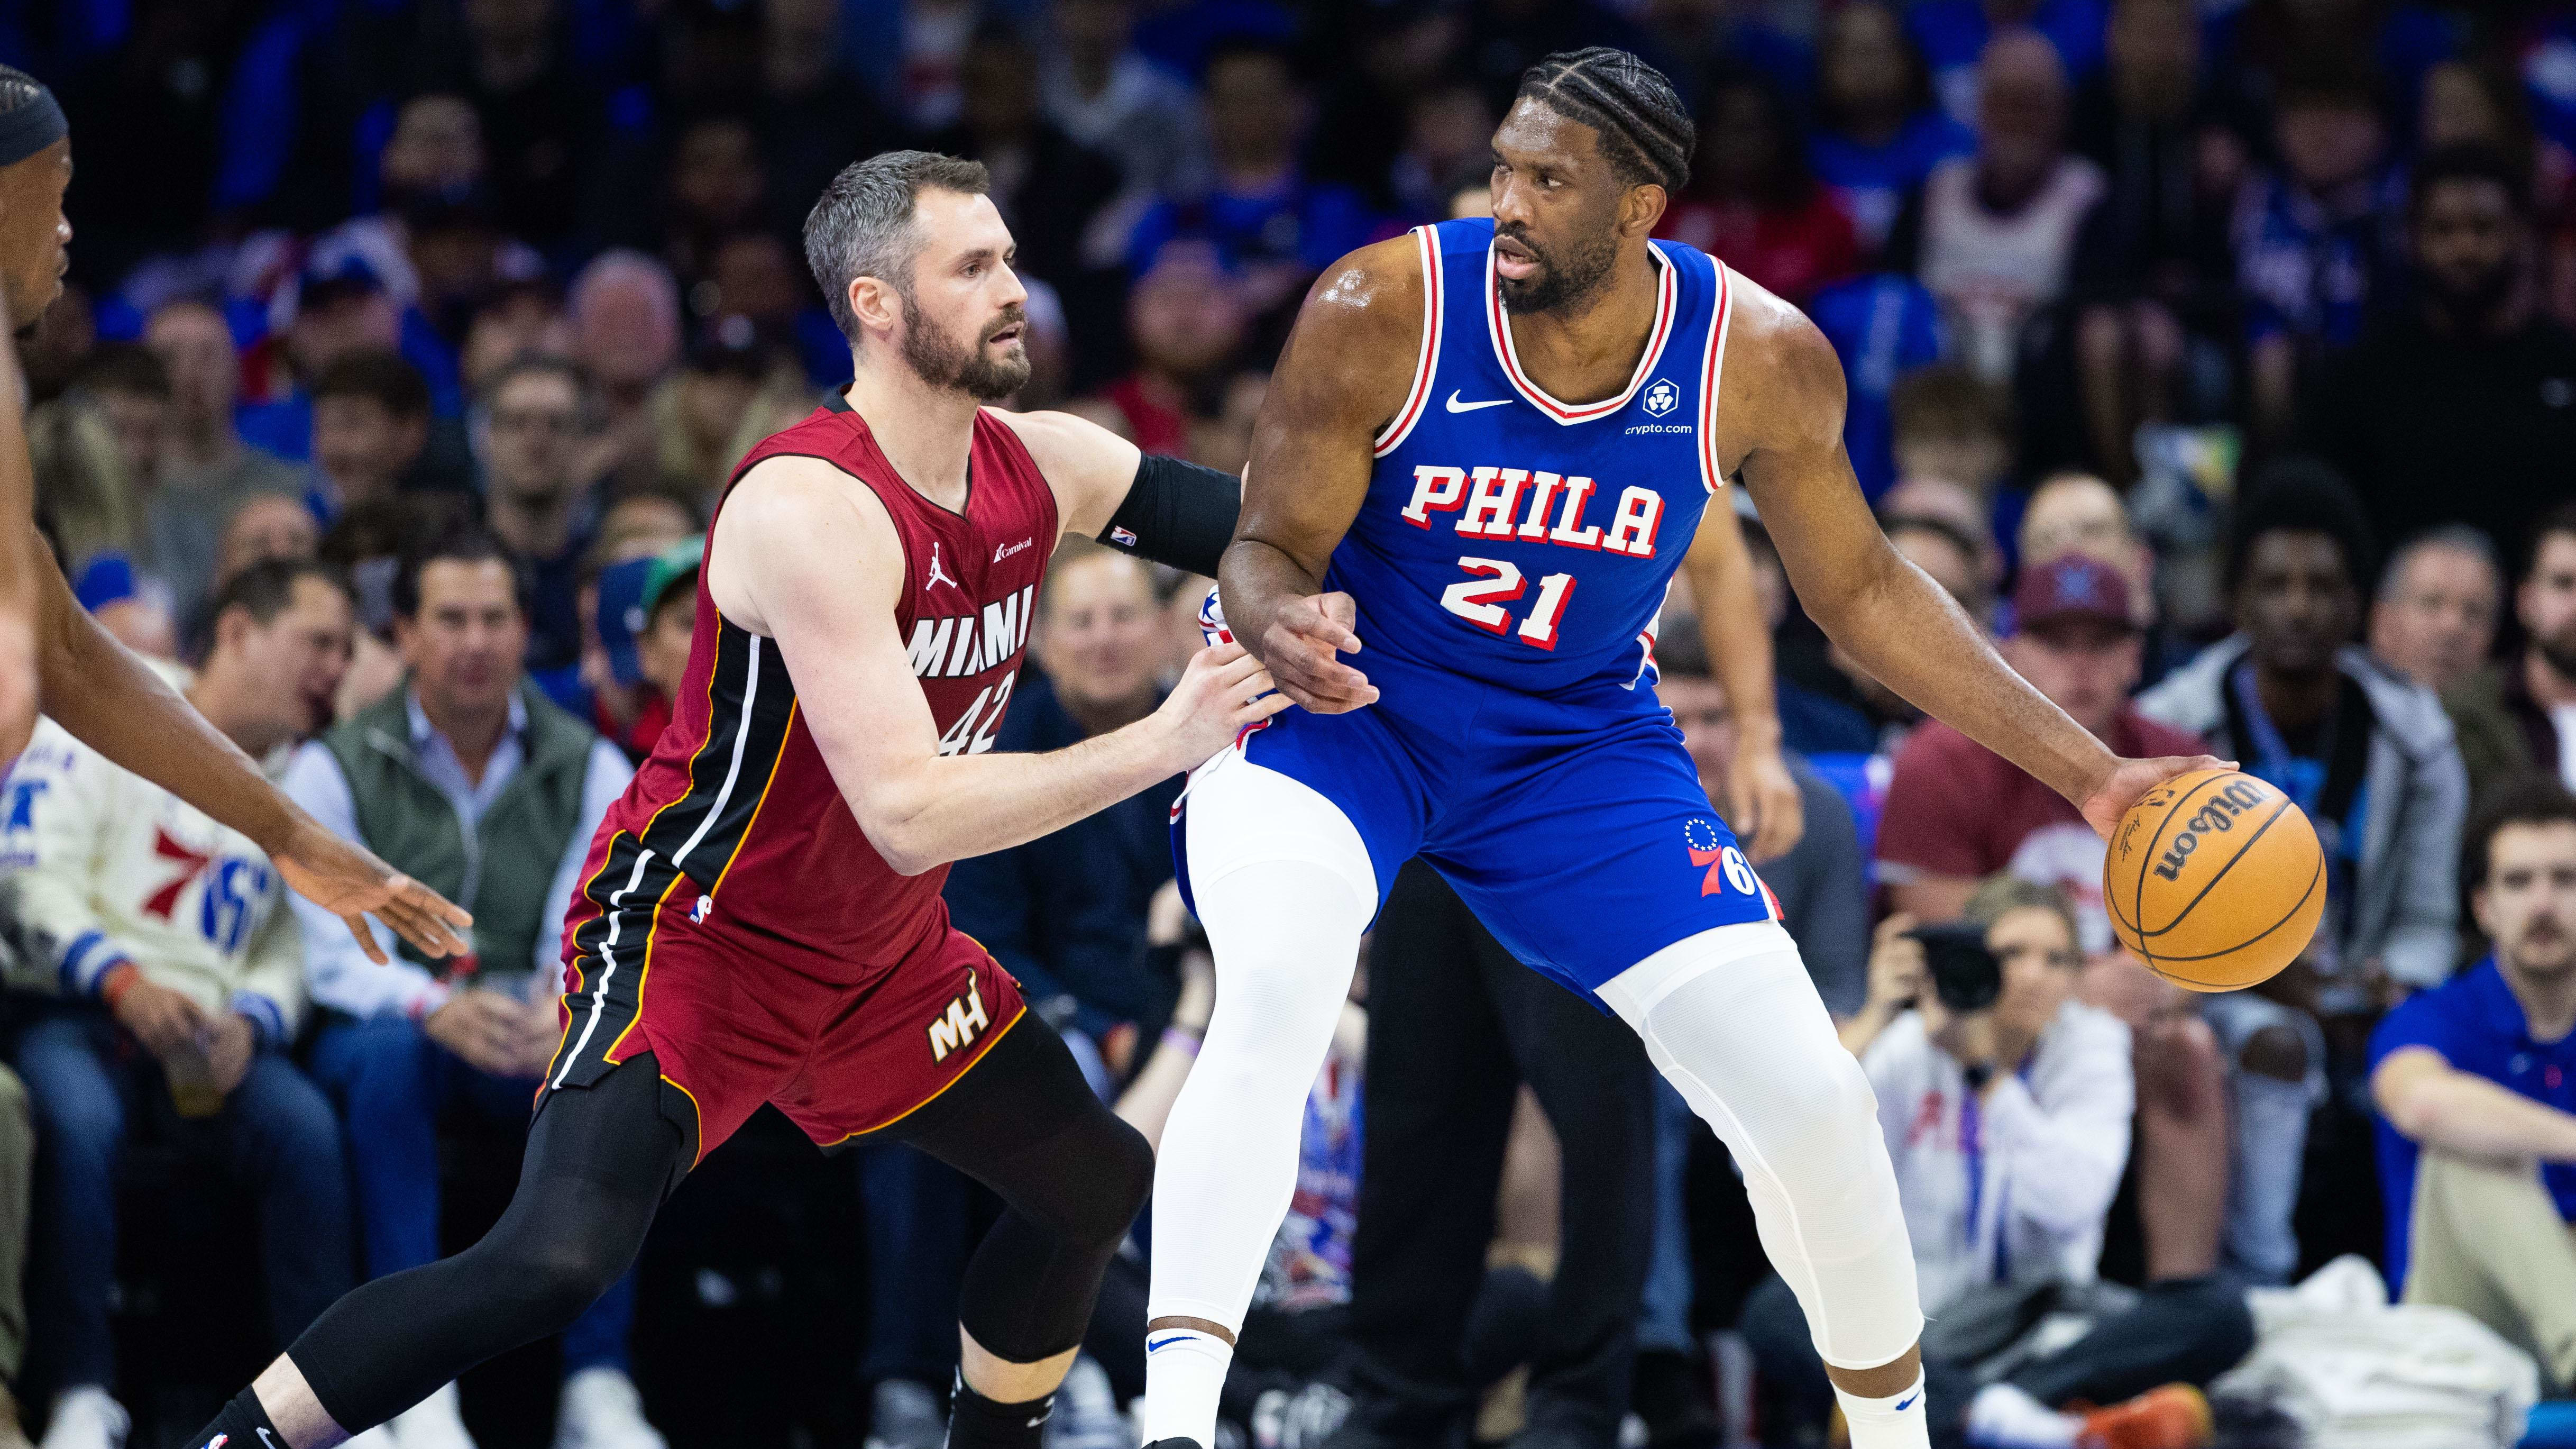 Joel Embiid dribbles the ball as Kevin Love guards him